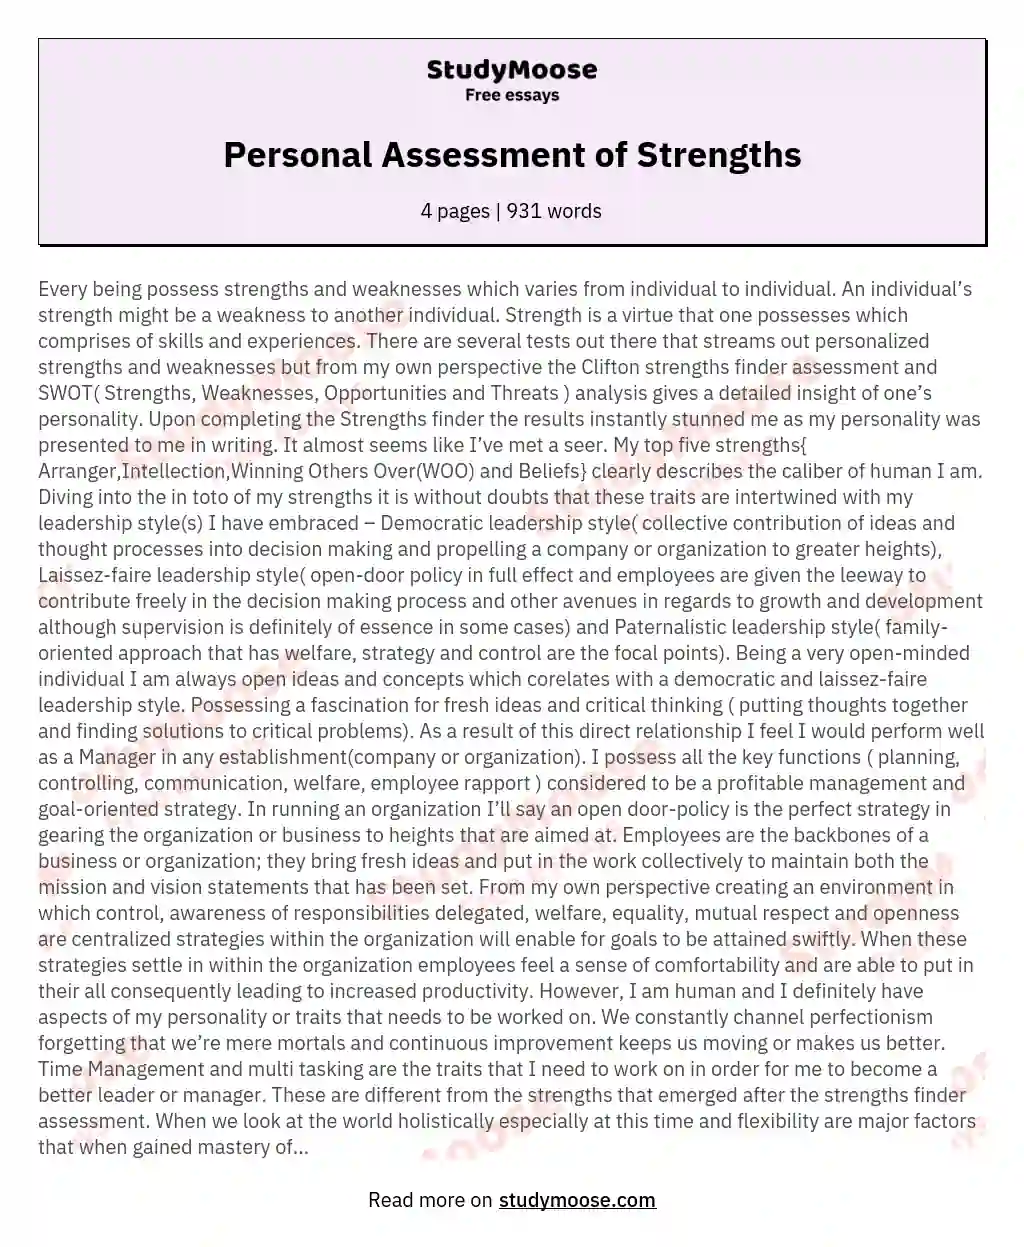 Personal Assessment of Strengths essay